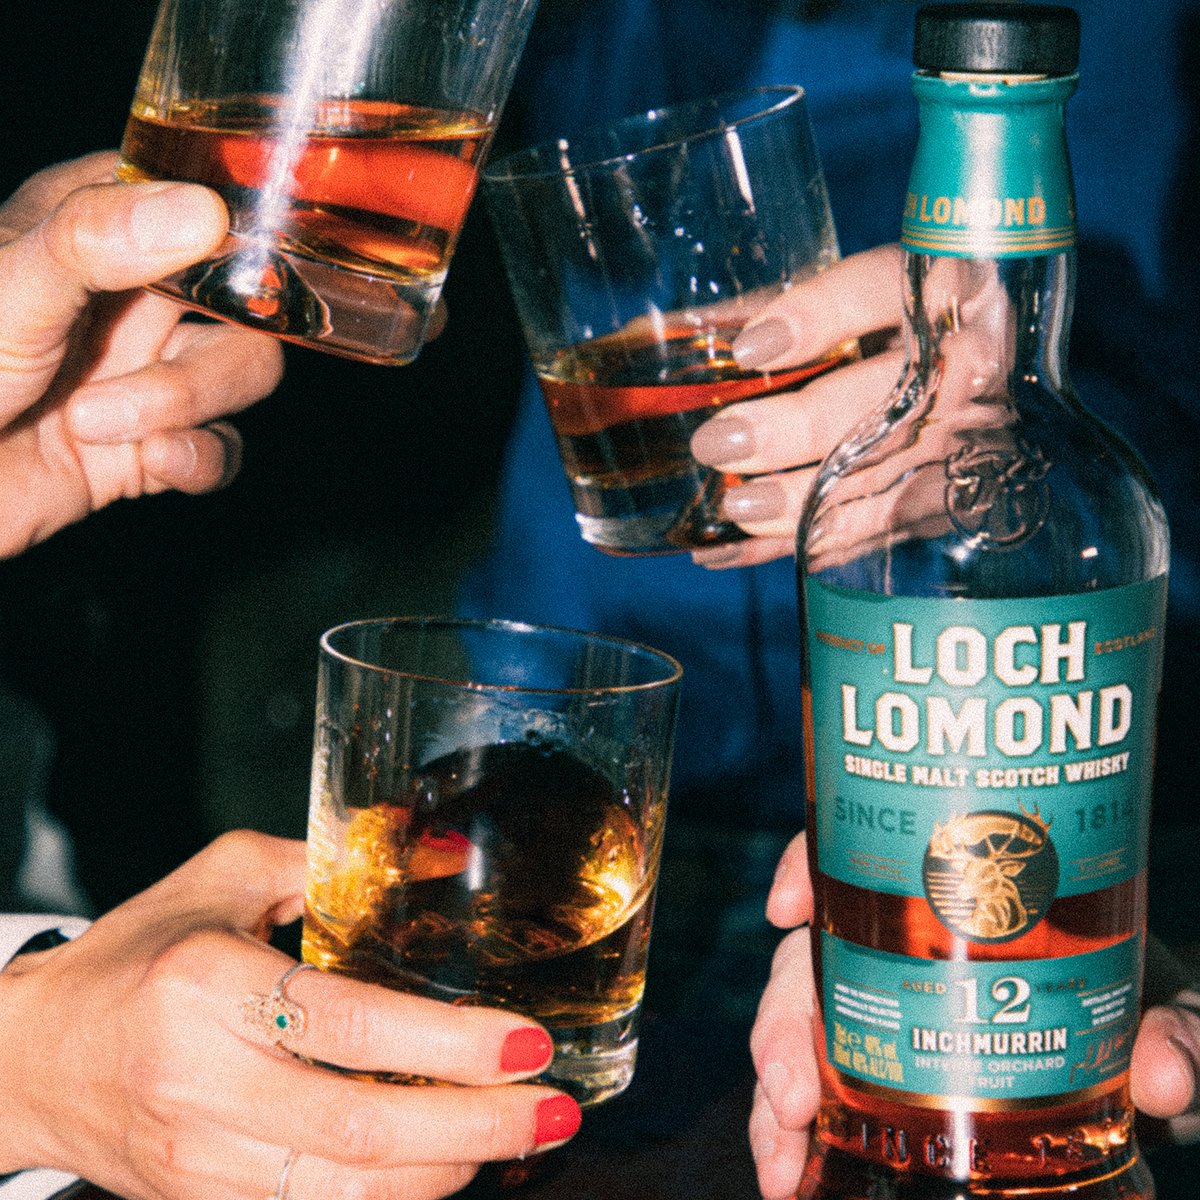 Perfect for time out or nights out. Aged in three types of American Oak casks, Inchmurrin 12 Year Old Single Malt delivers delicious orchard fruit and sweet notes of peach, apricot, toffee and vanilla.